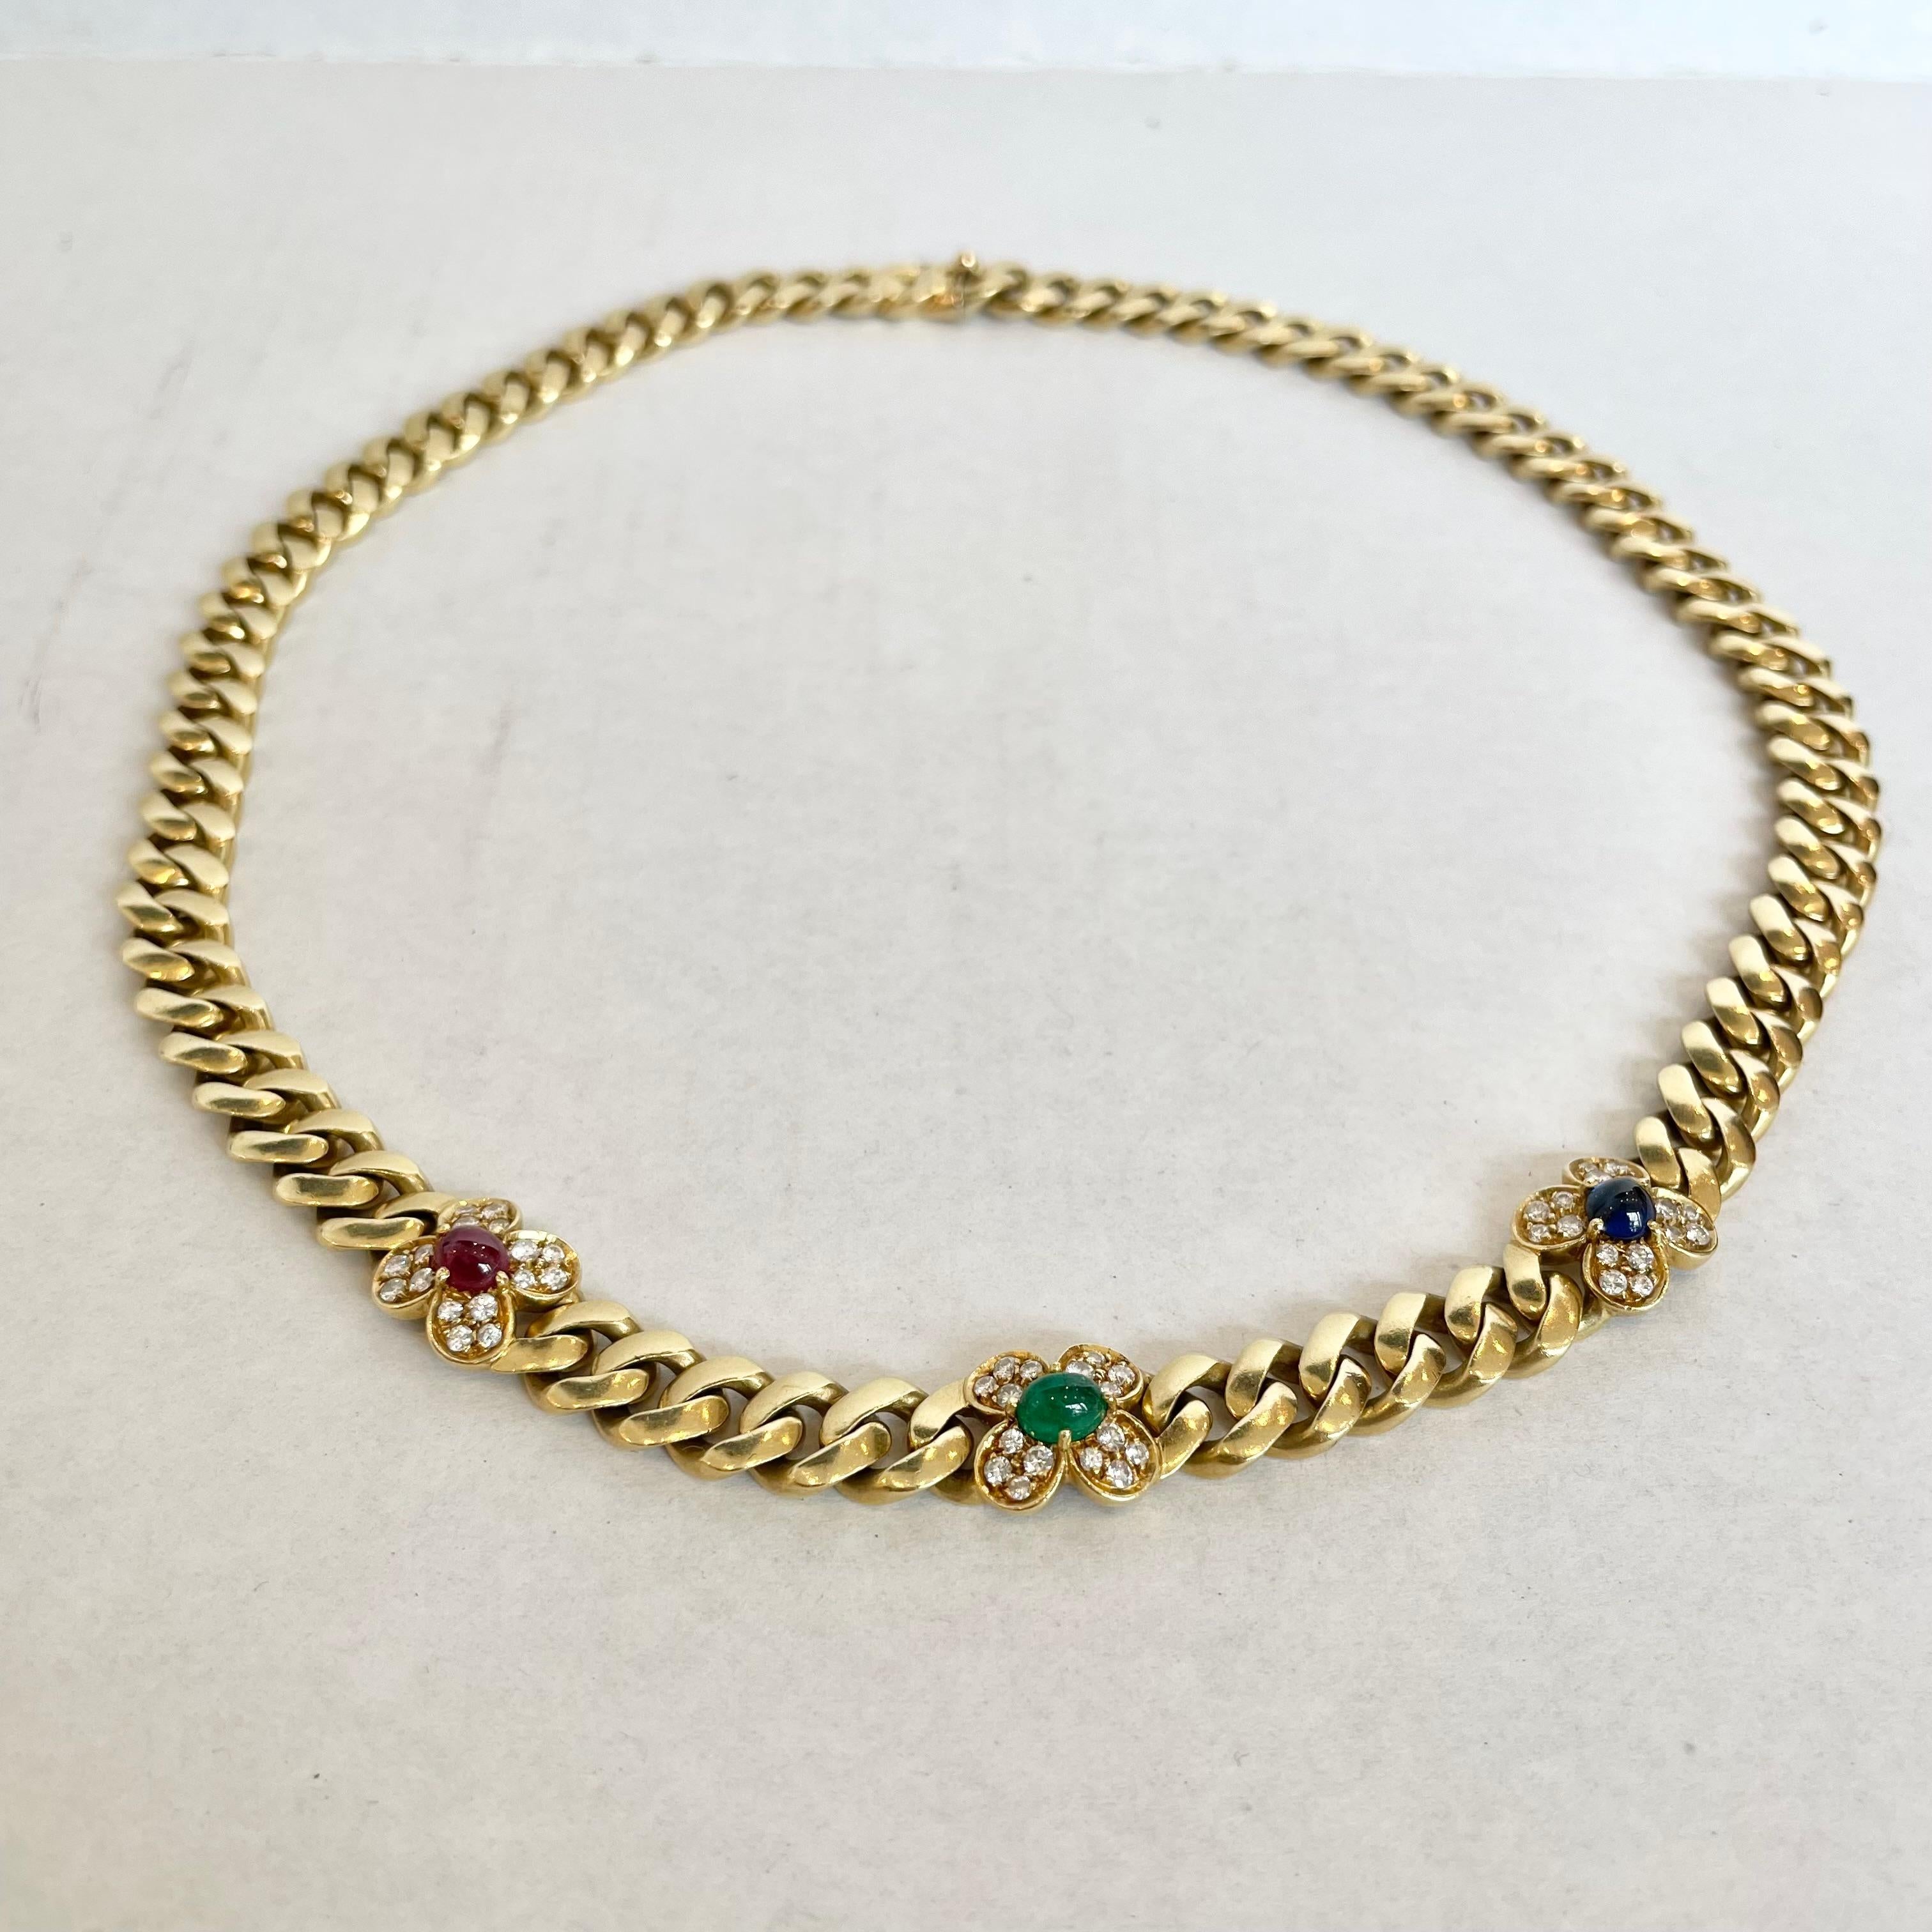 Stunning Bulgari necklace with a curb link chain embellished with three quatrefoil motifs set with sapphire, emerald, and ruby cabochons and accented by round diamonds. Italian assay and registry marks and signed Bulgari. Diamonds weighing a total